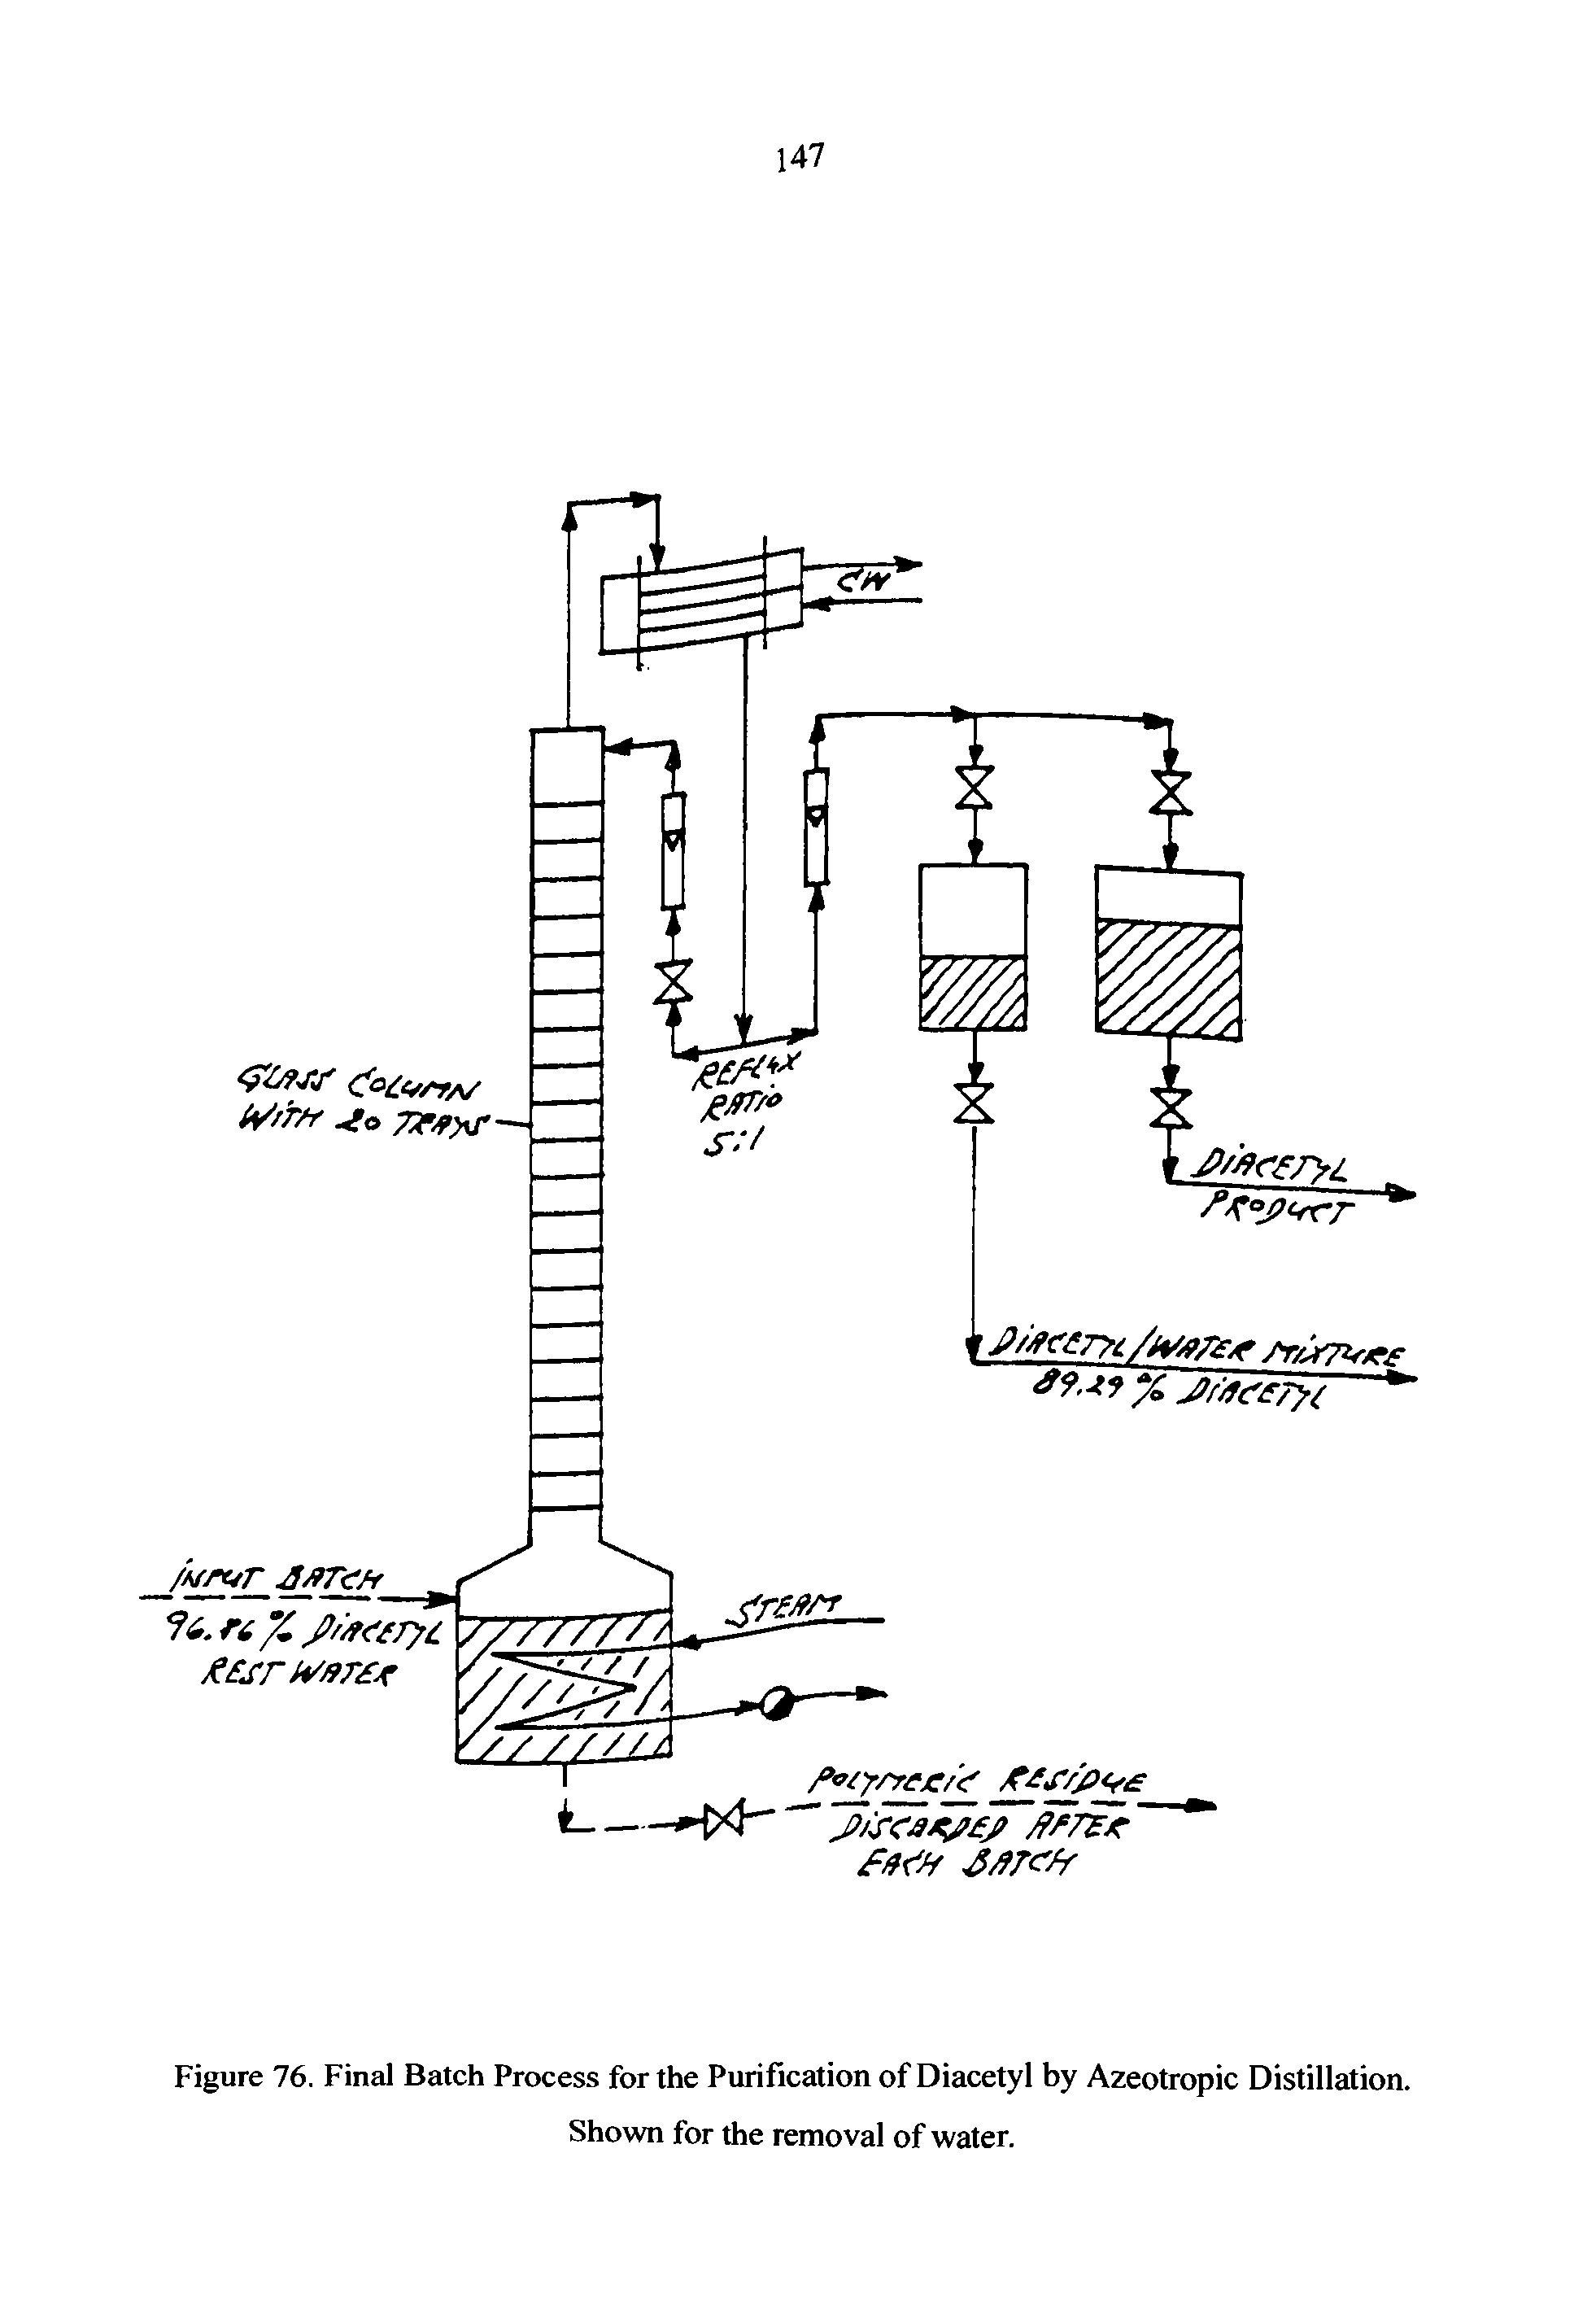 Figure 76. Final Batch Process for the Purification of Diacetyl by Azeotropic Distillation.